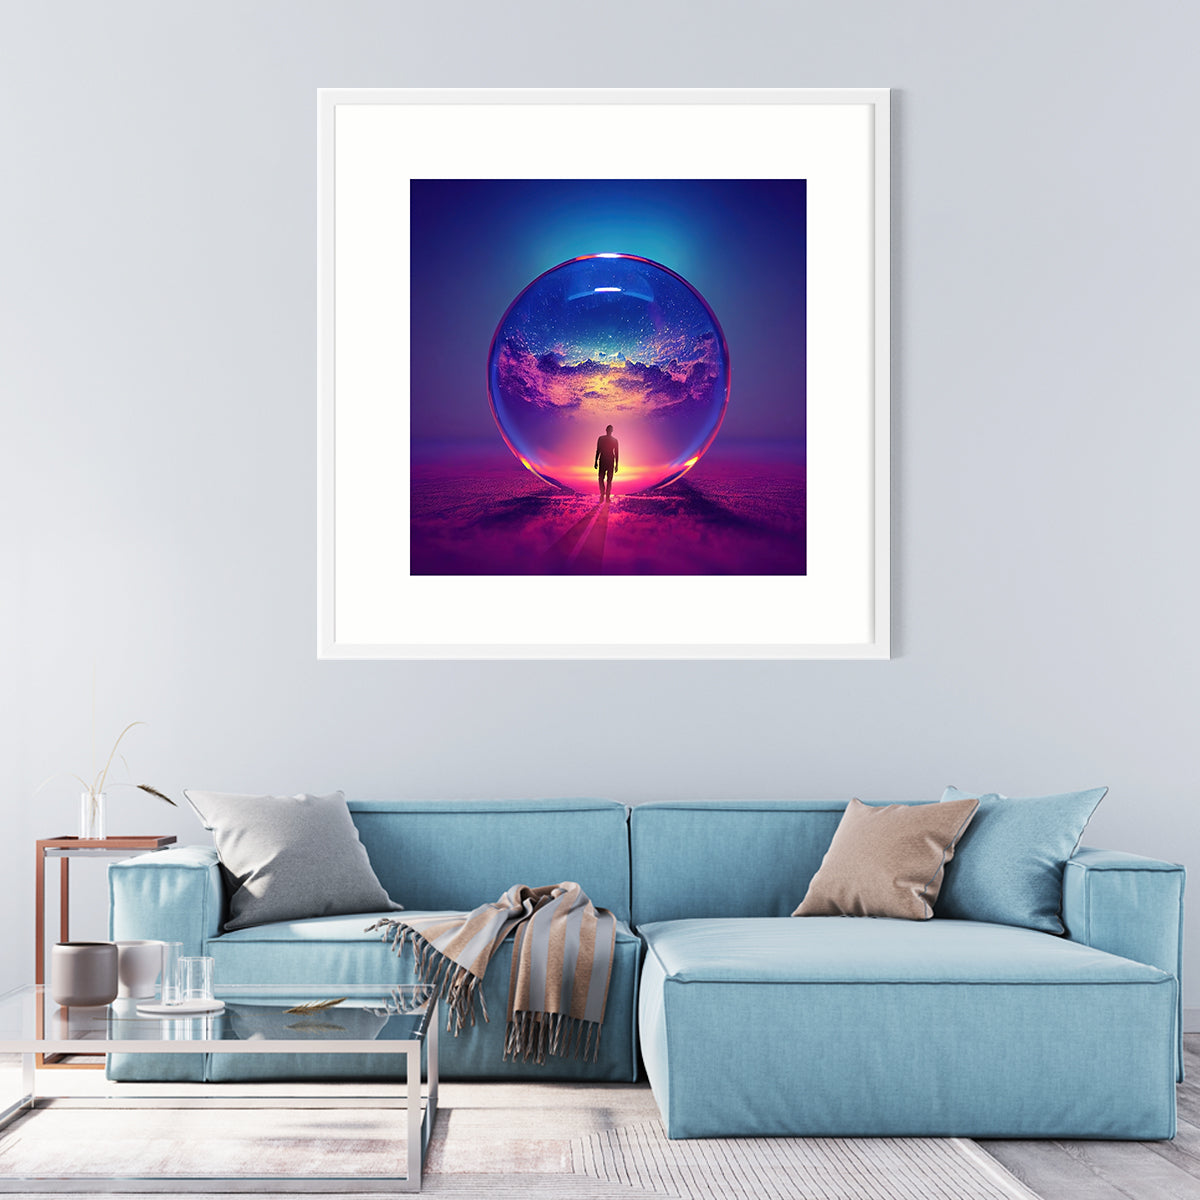 Universe in Crystal Ball Abstract Posters For Home-Square Posters NOT FRAMED-CetArt-8″x8″ inches-CetArt